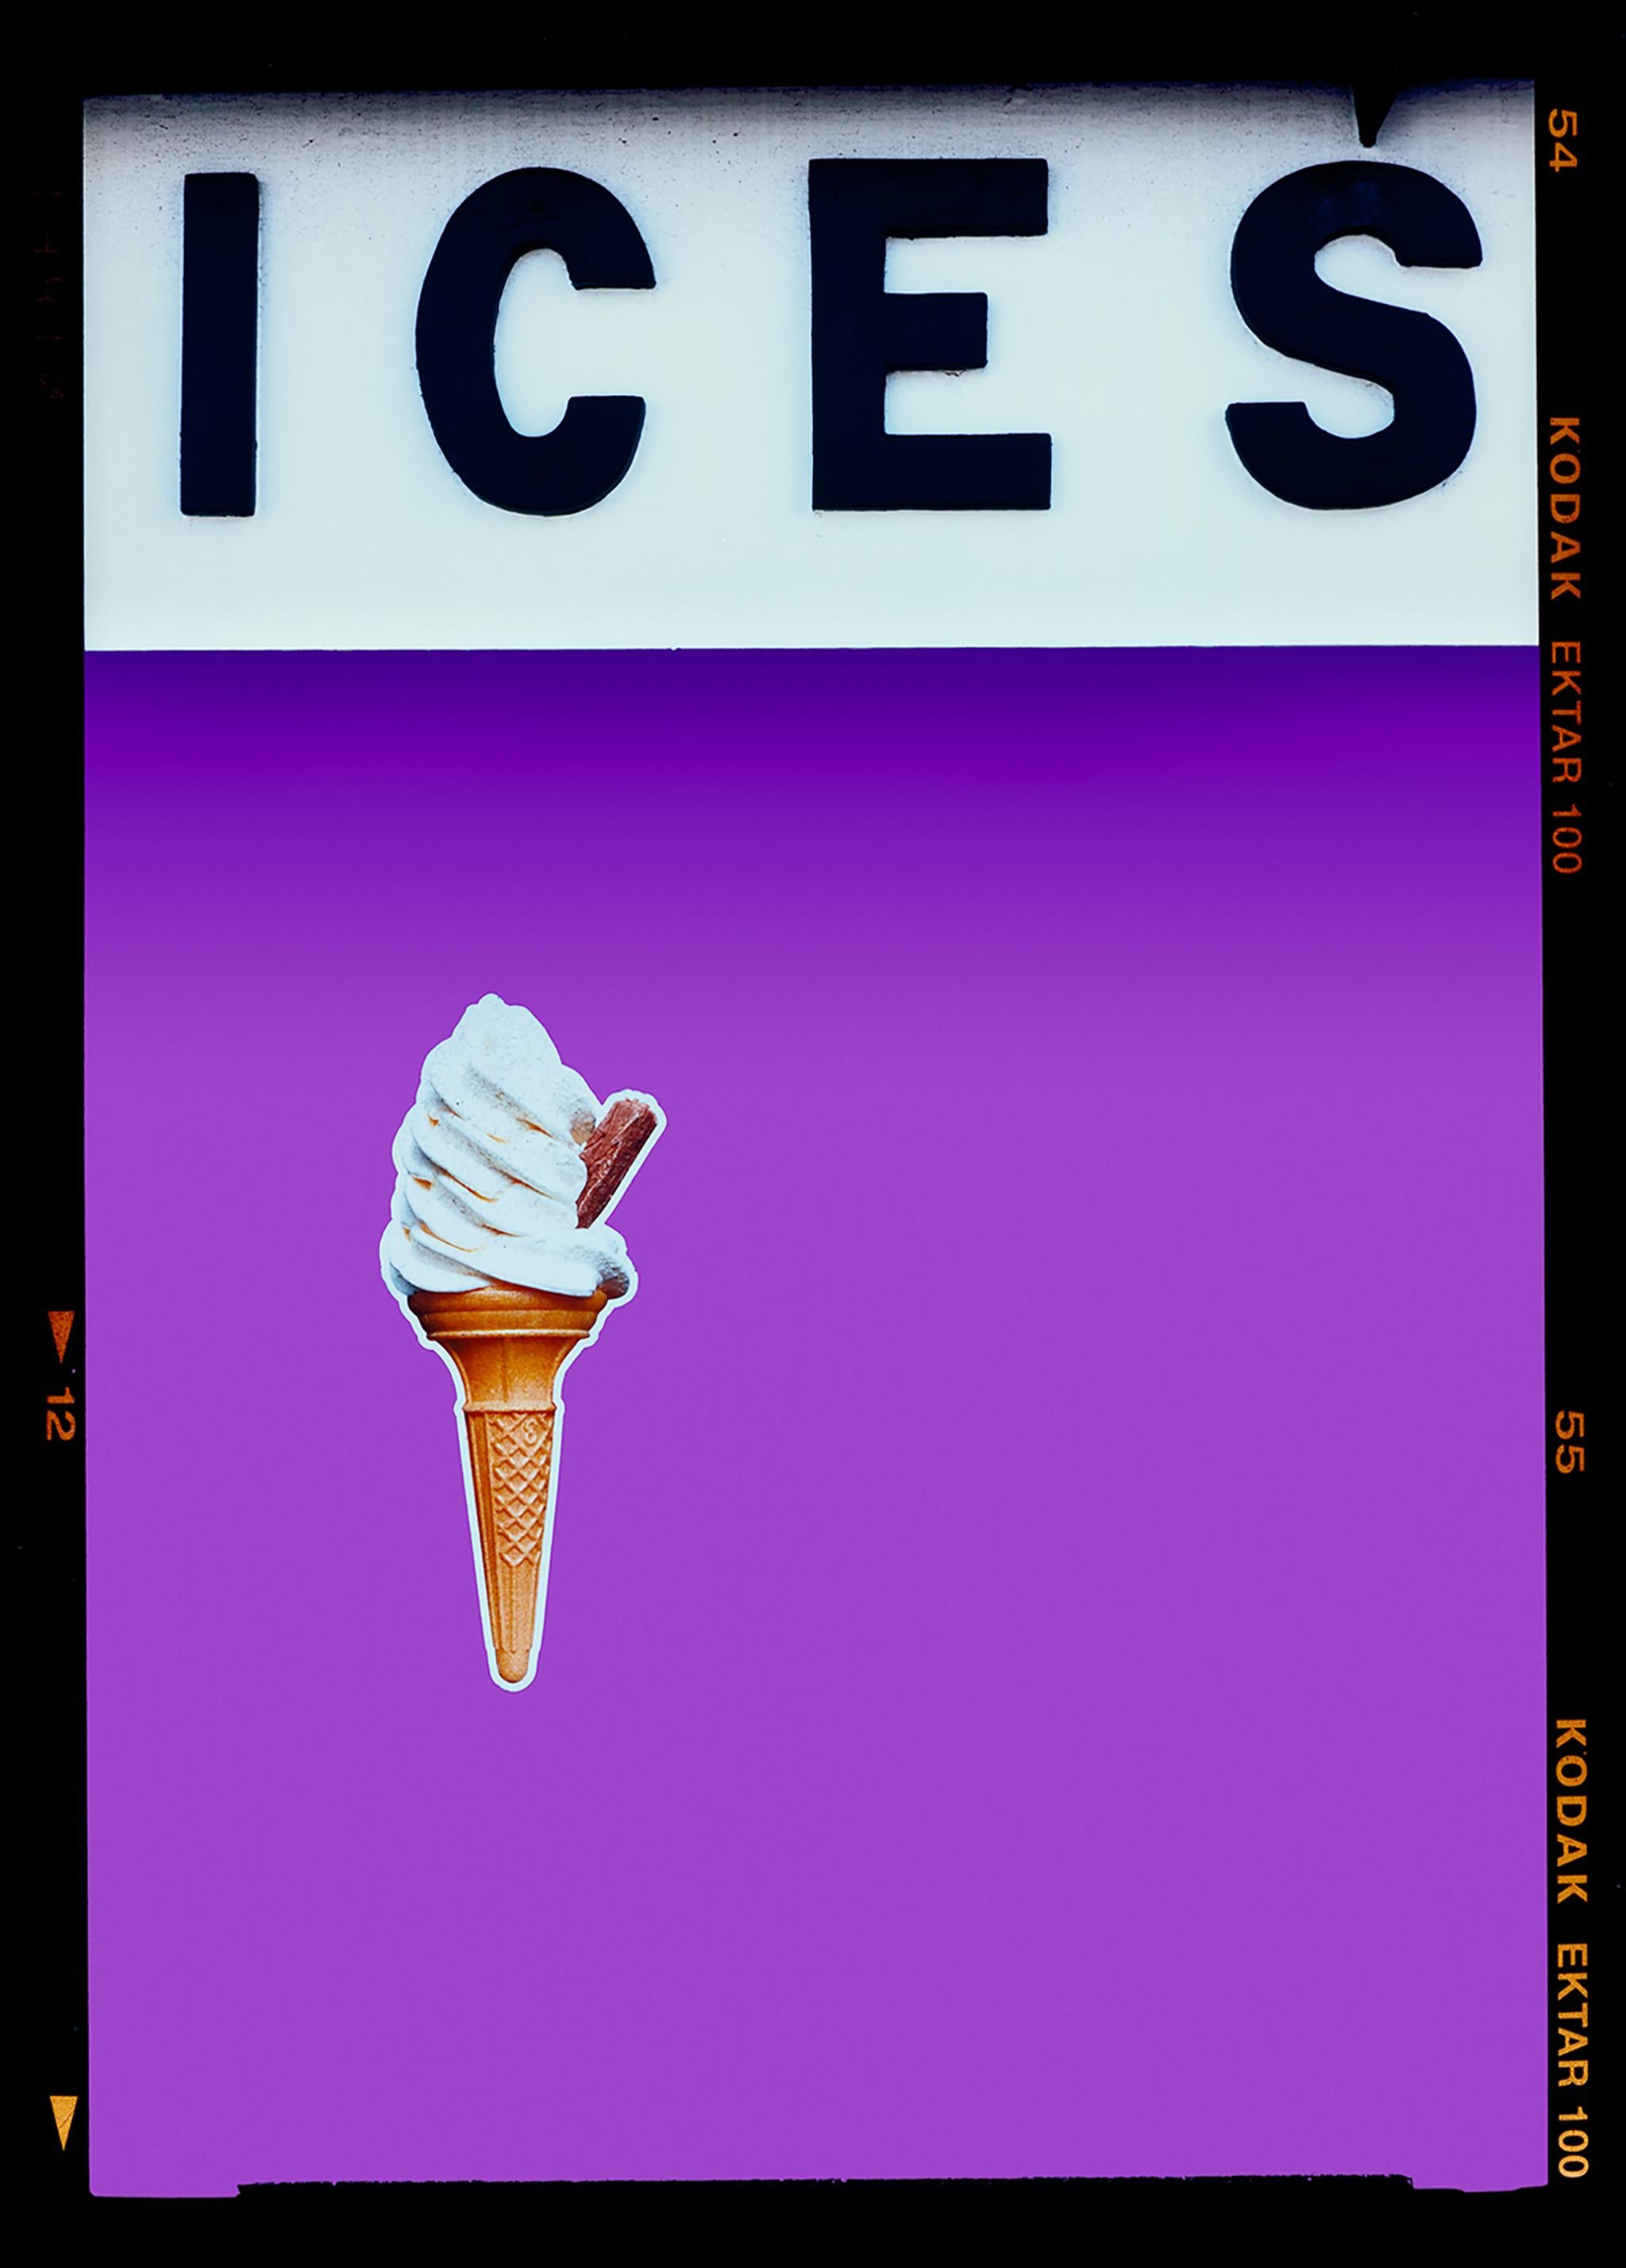 Richard Heeps Color Photograph - Ices (Lilac), Bexhill-on-Sea - British seaside color photography